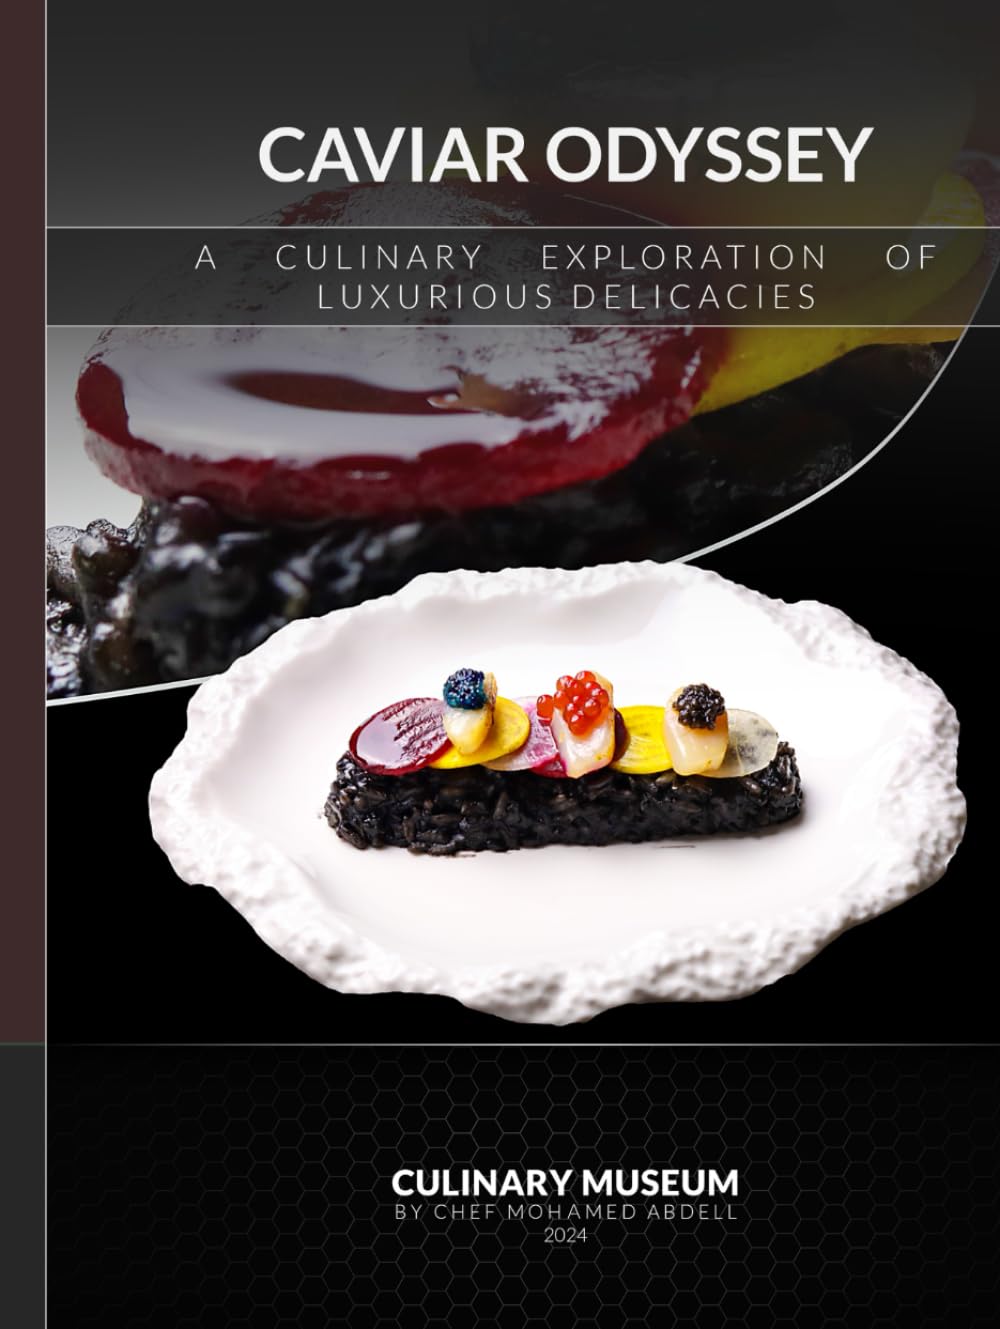 CAVIAR ODYSSEY: A CULINARY EXPLORATION OF LUXURIOUS DELICACIES: CULINARY MUSEUM BY CHEF MOHAMED ABDELL